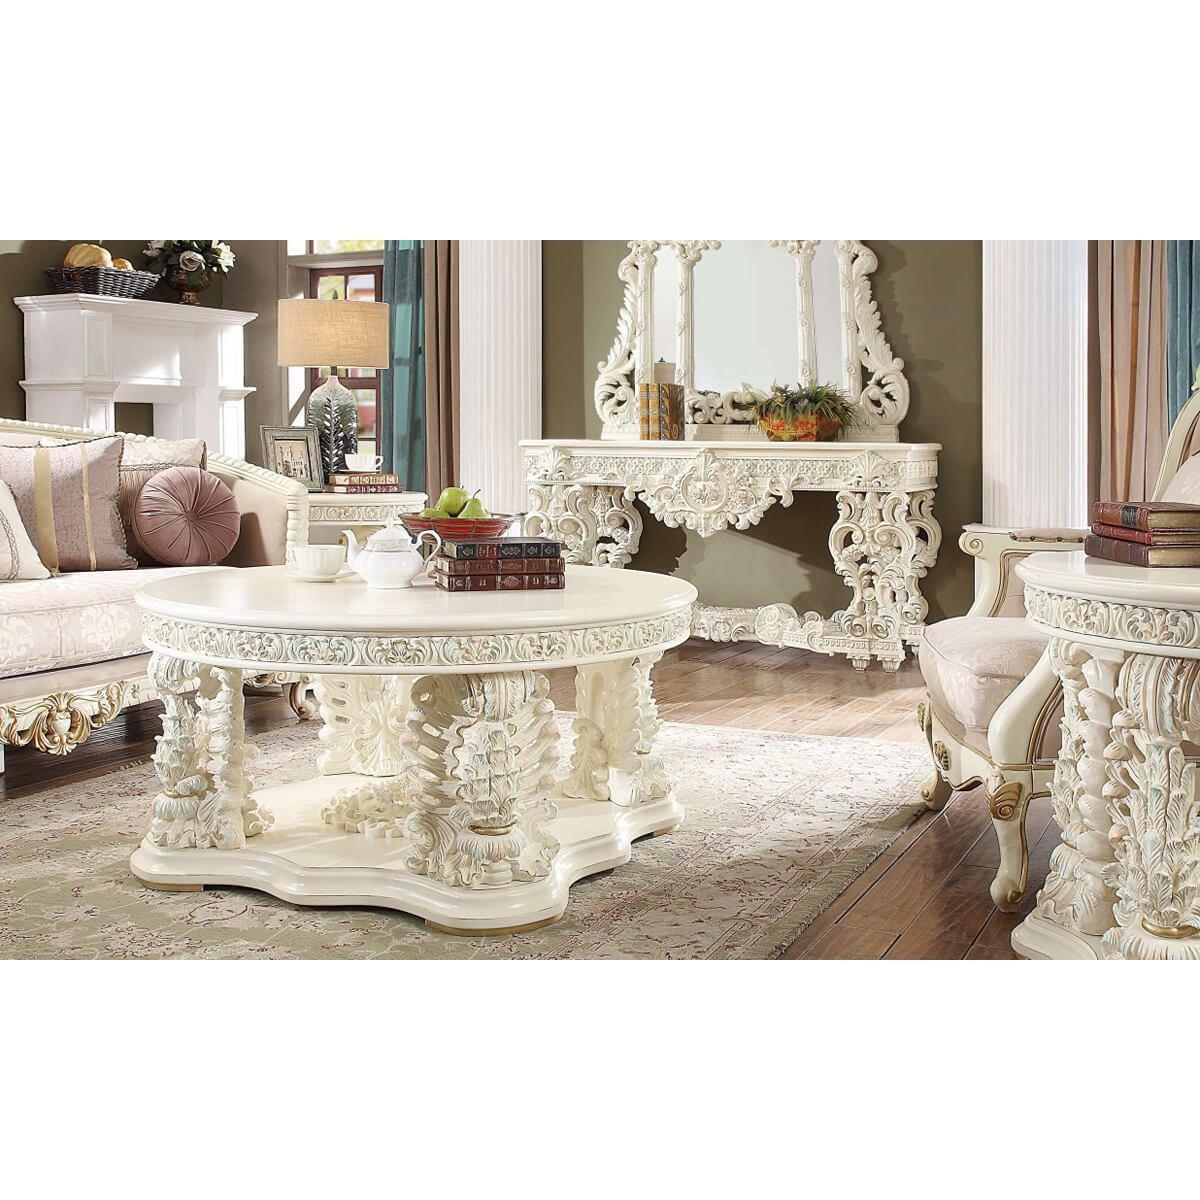 Homey Design Luxury Hd-8089 - 3Pc Coffee Table Set-Iron Home Concepts